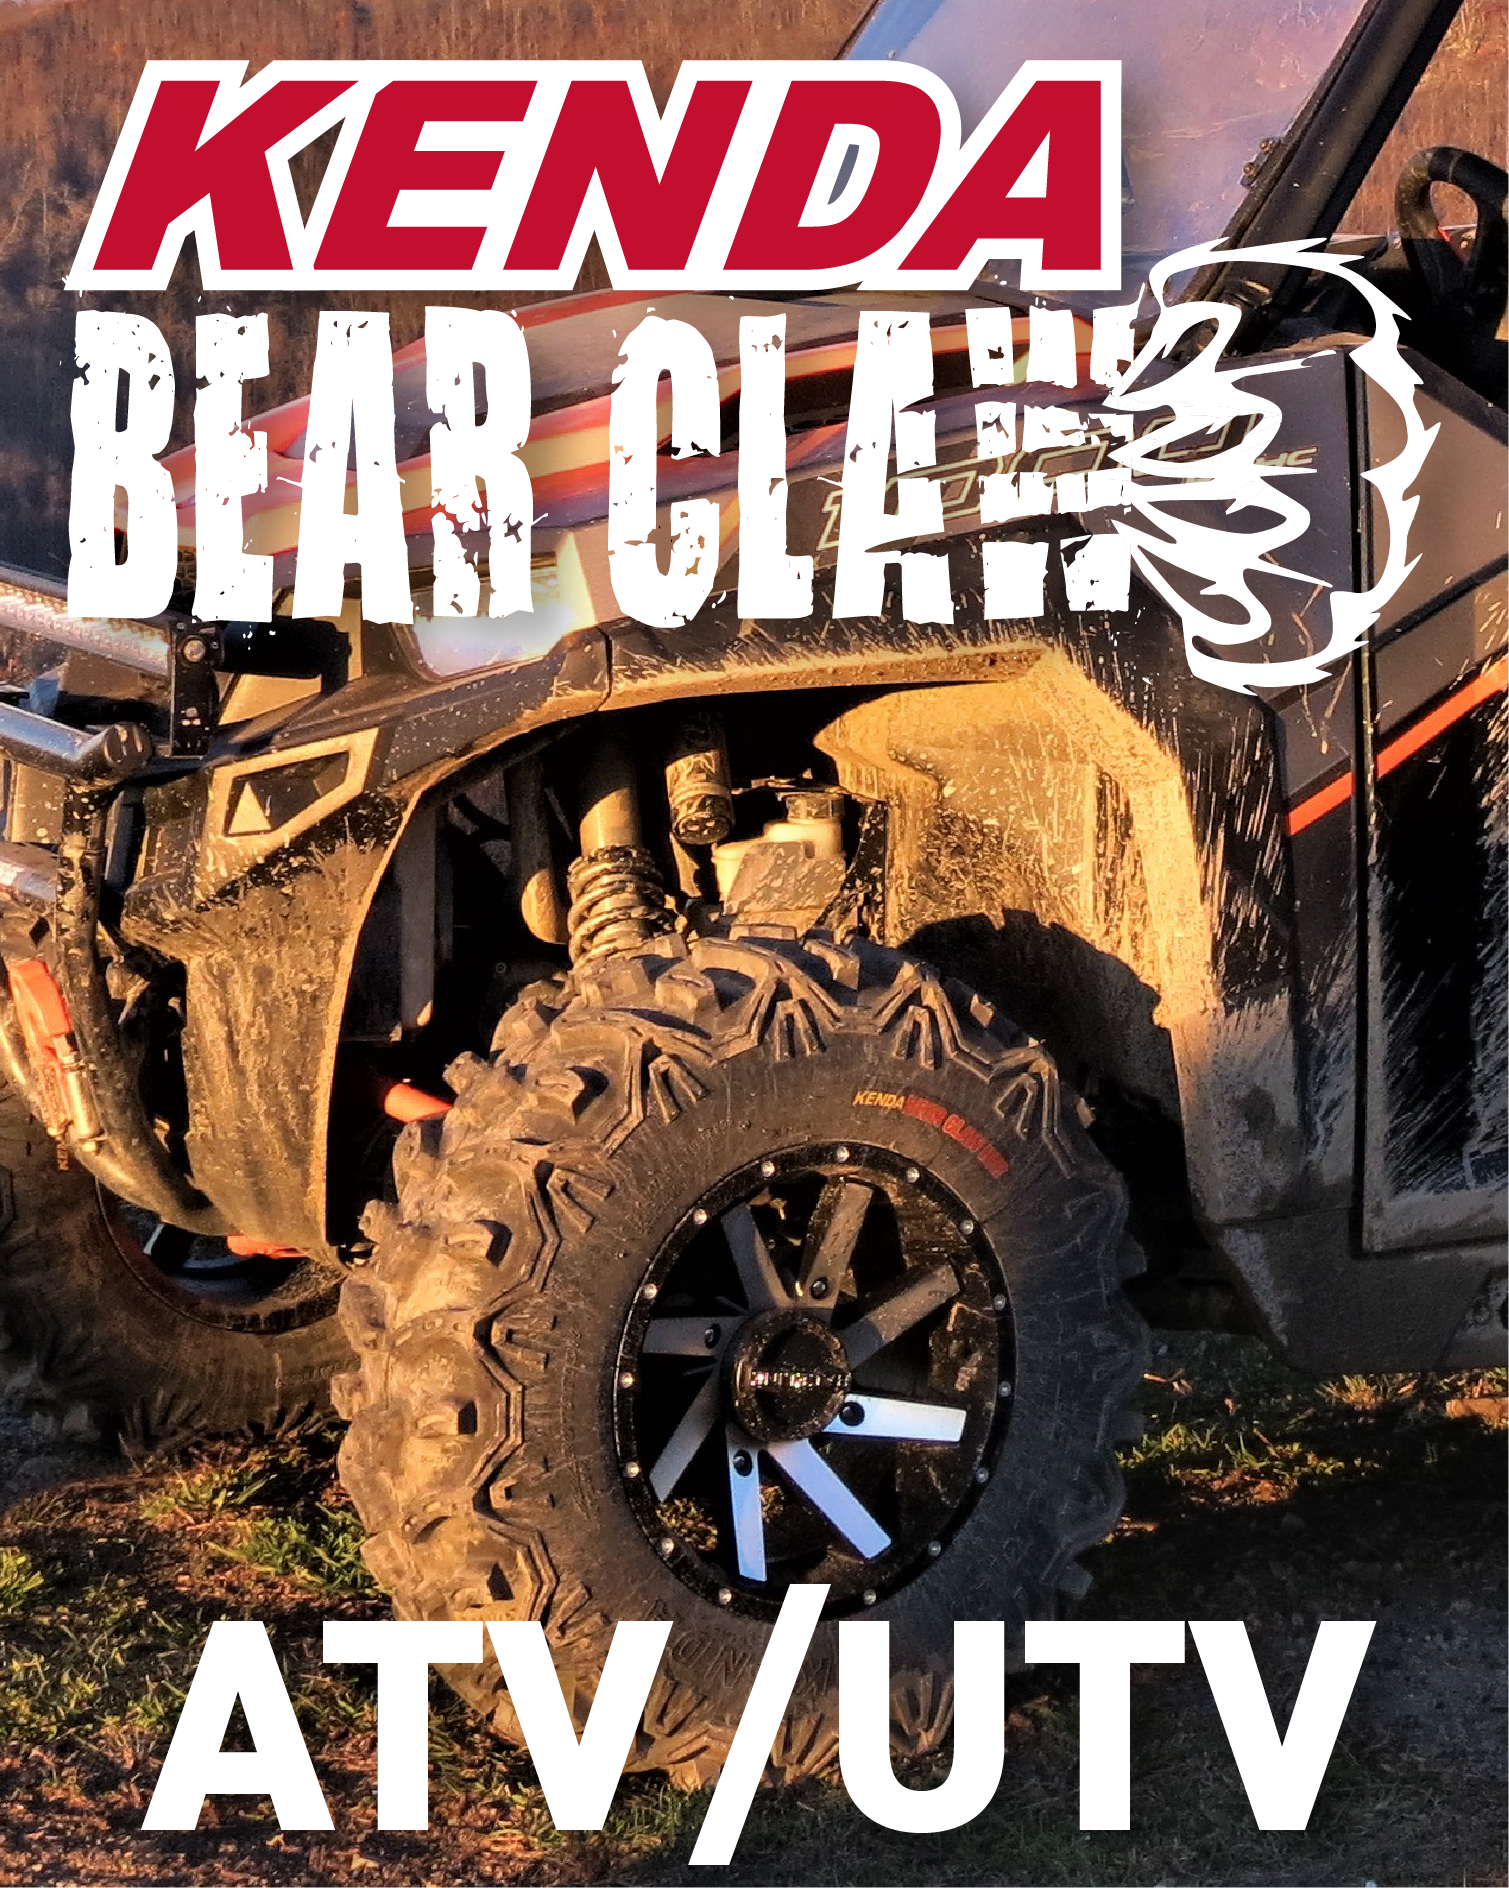 Kenda Bear Claw EX 27x10-12 Front ATV 6 PLY Tires Bearclaw 27x10x12 - 4 Pack